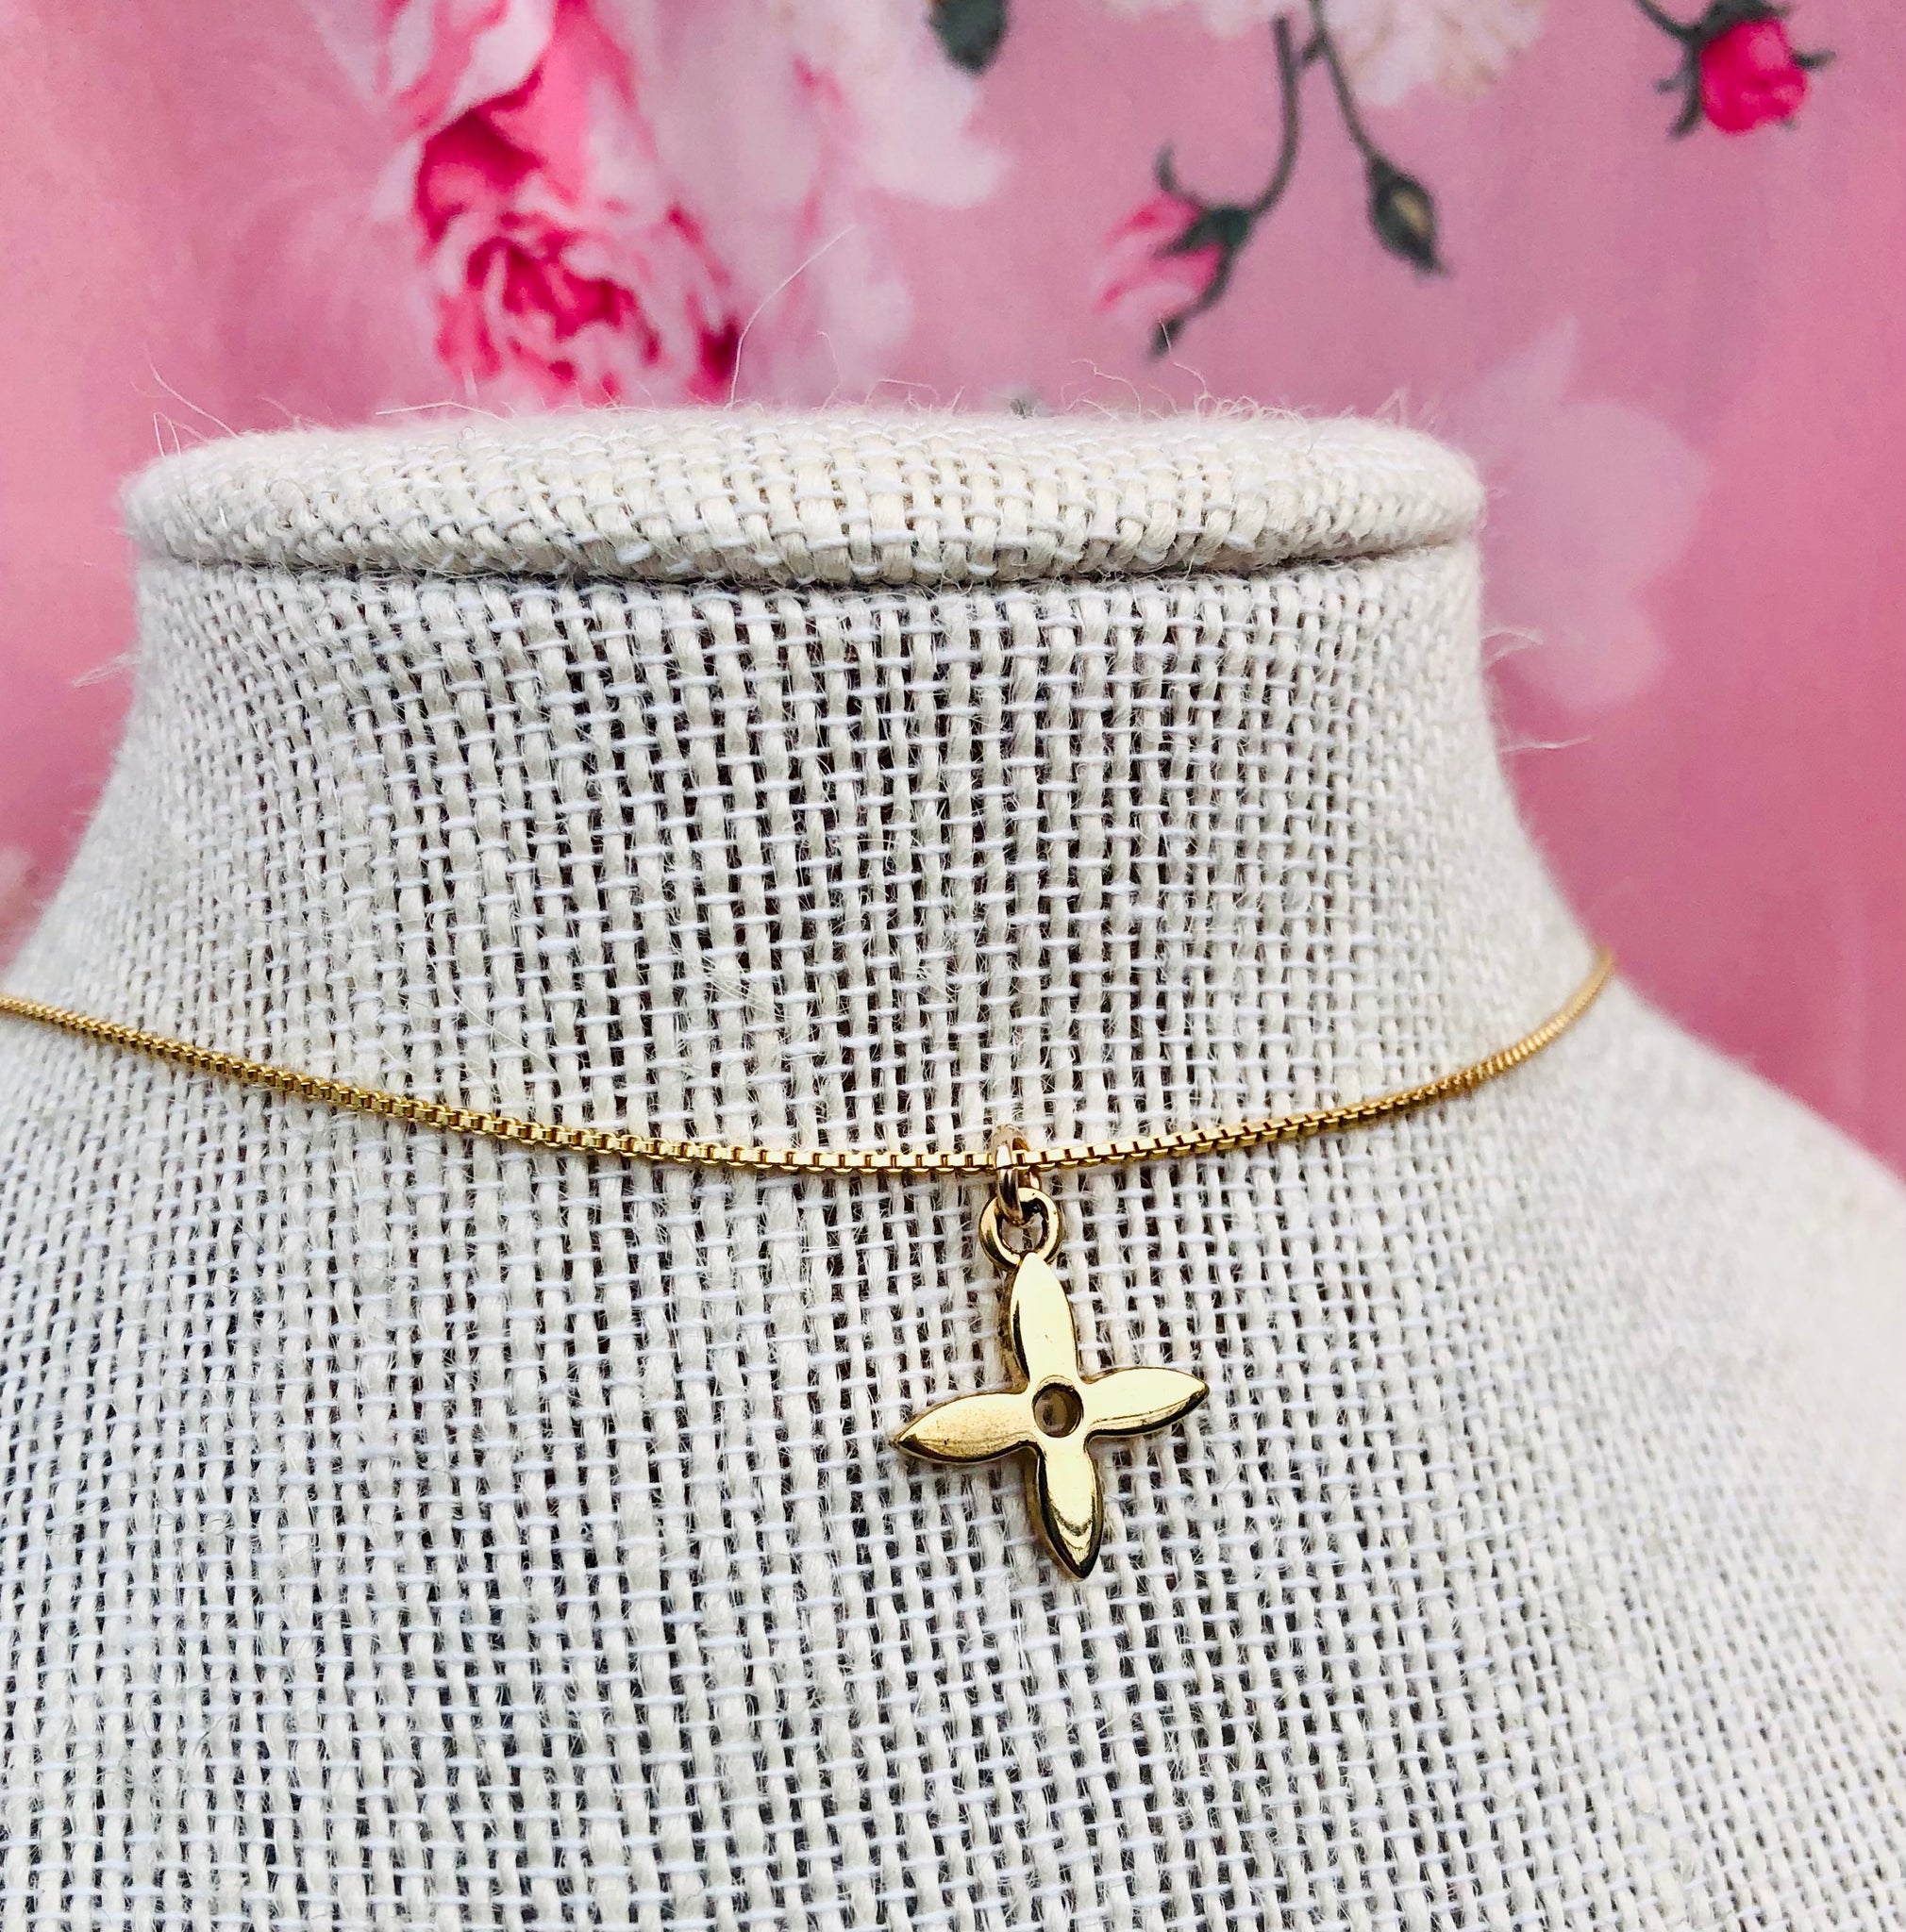 Authentic reworked Louis Vuitton small charm necklace.